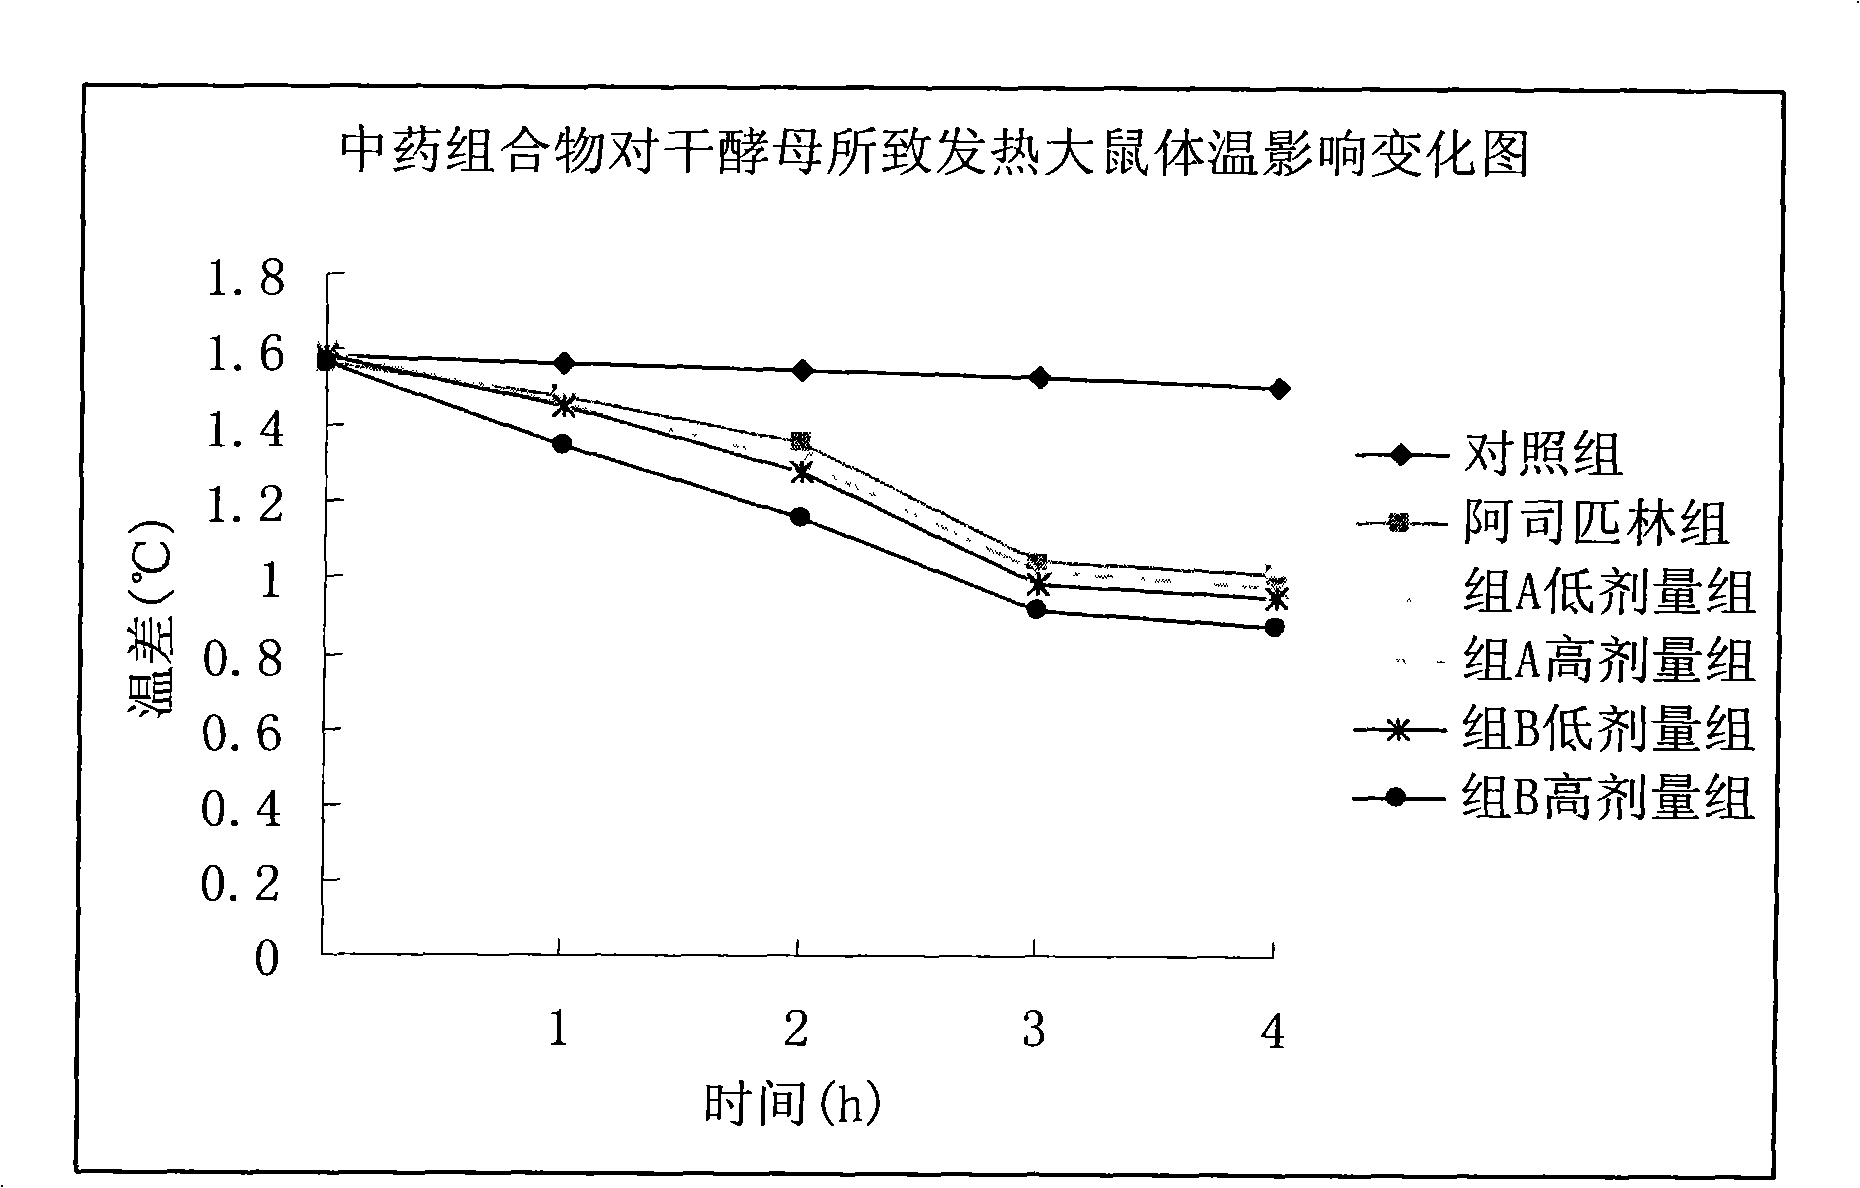 Chinese medicinal composition for treating common cold, acute and chronic tracheitis and preparation method thereof